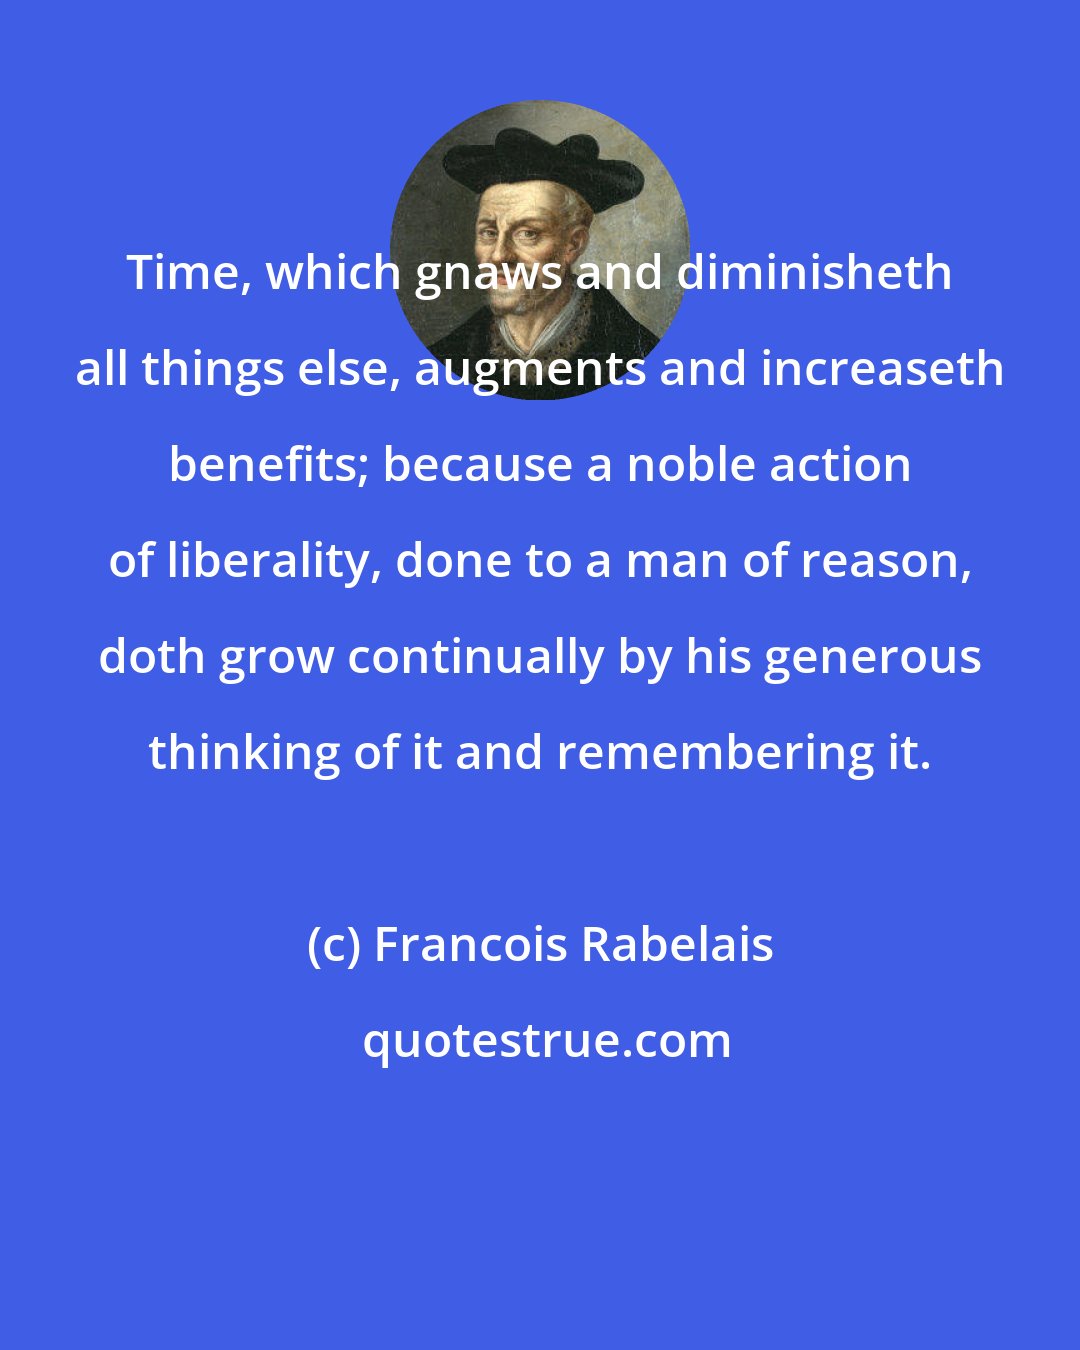 Francois Rabelais: Time, which gnaws and diminisheth all things else, augments and increaseth benefits; because a noble action of liberality, done to a man of reason, doth grow continually by his generous thinking of it and remembering it.